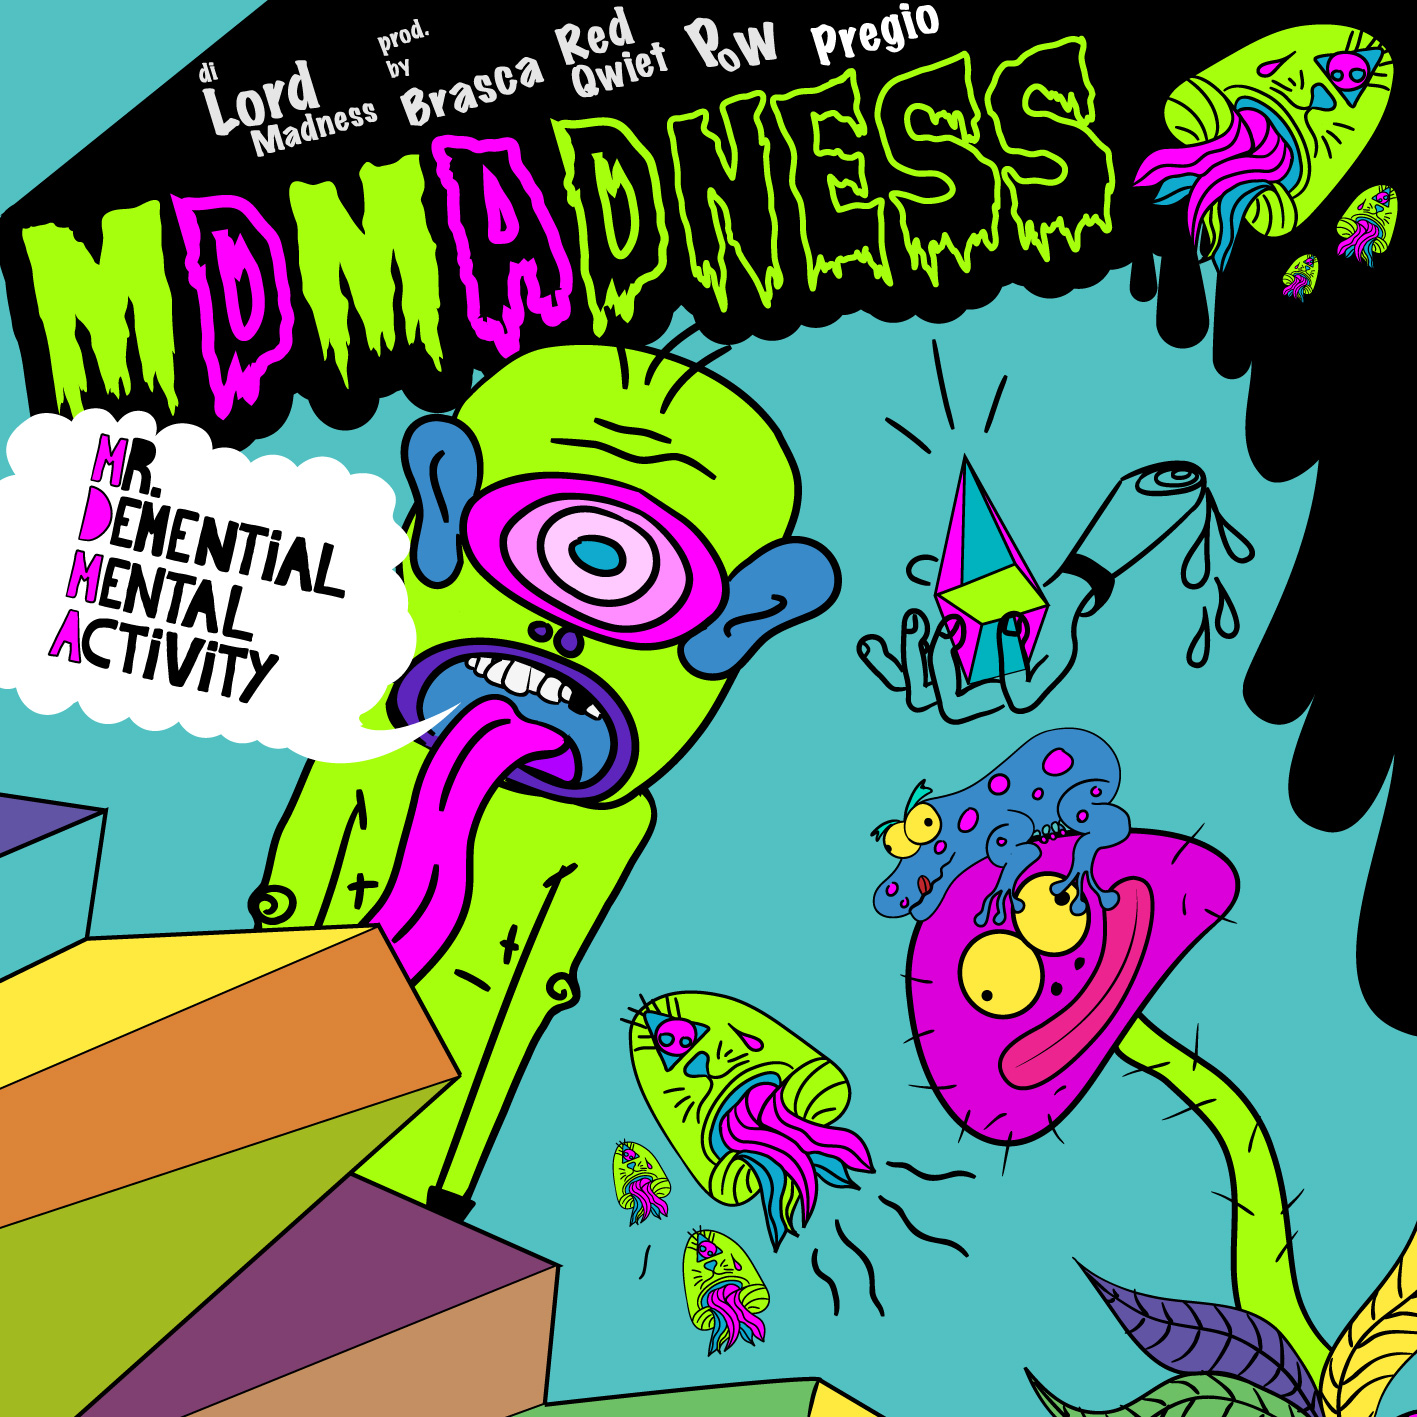 Lord Madness - M.D.M.A.dness